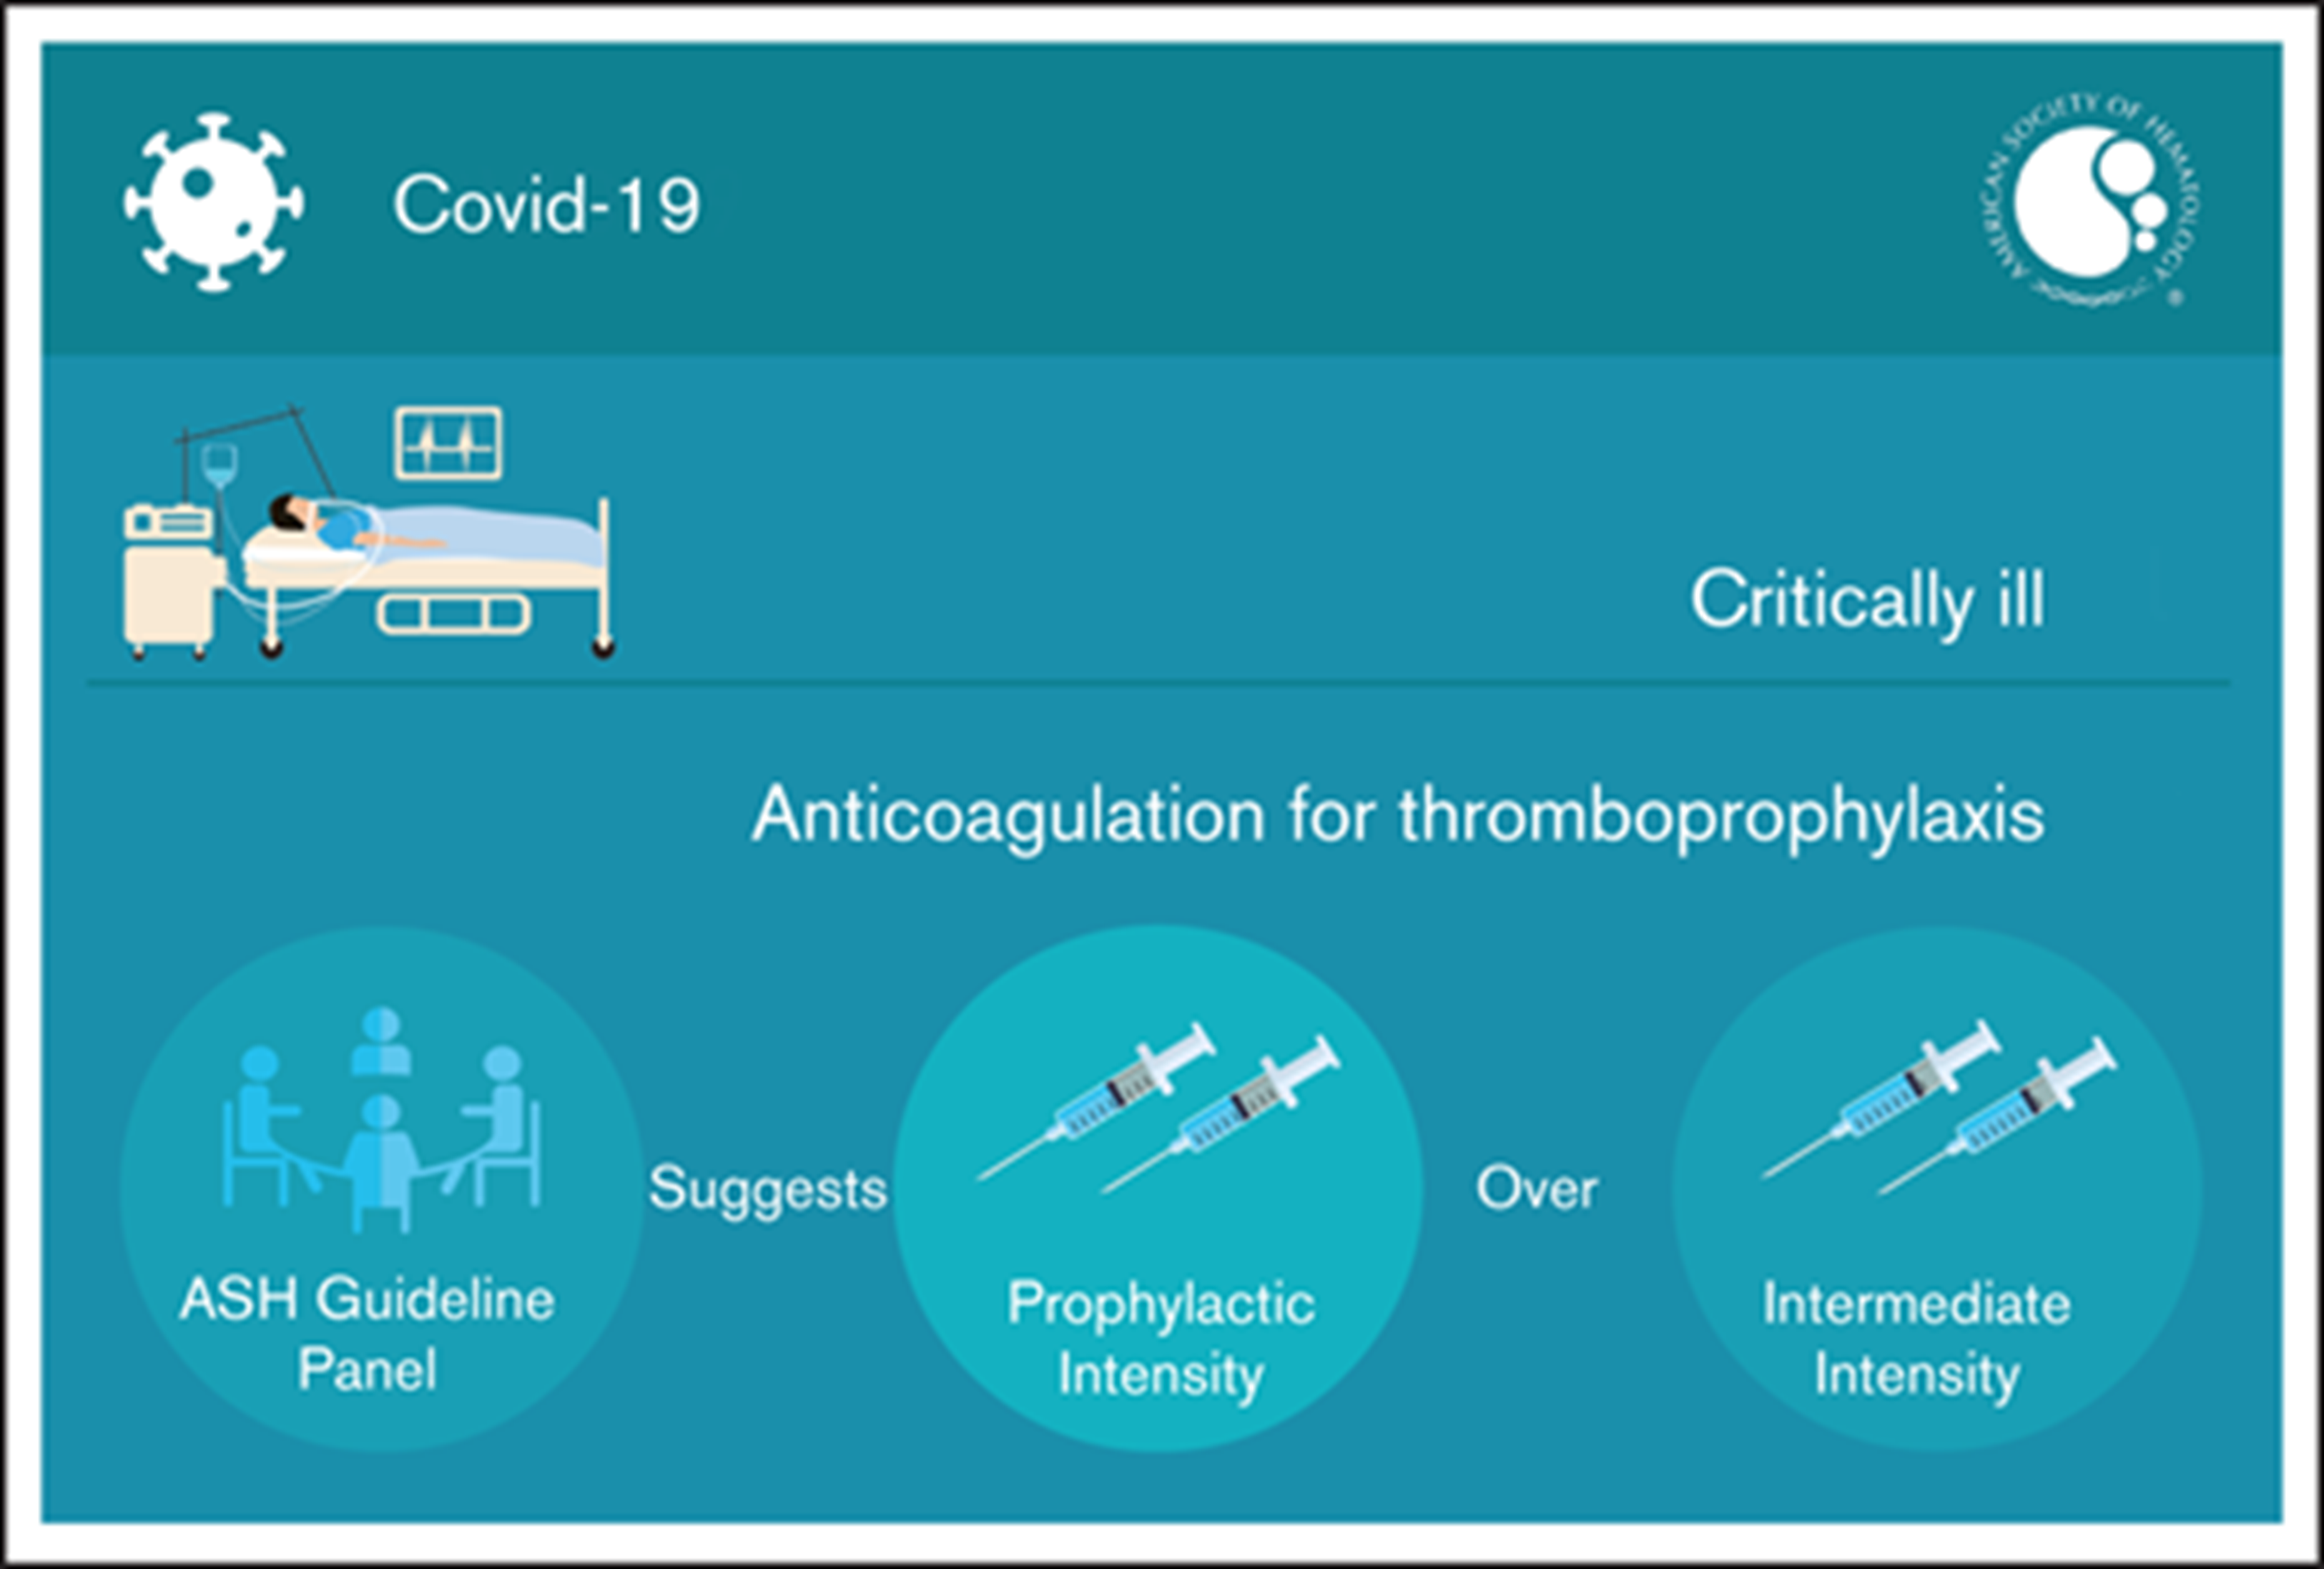 Anticoagulation in Patients with COVID-19 -- Critically ill